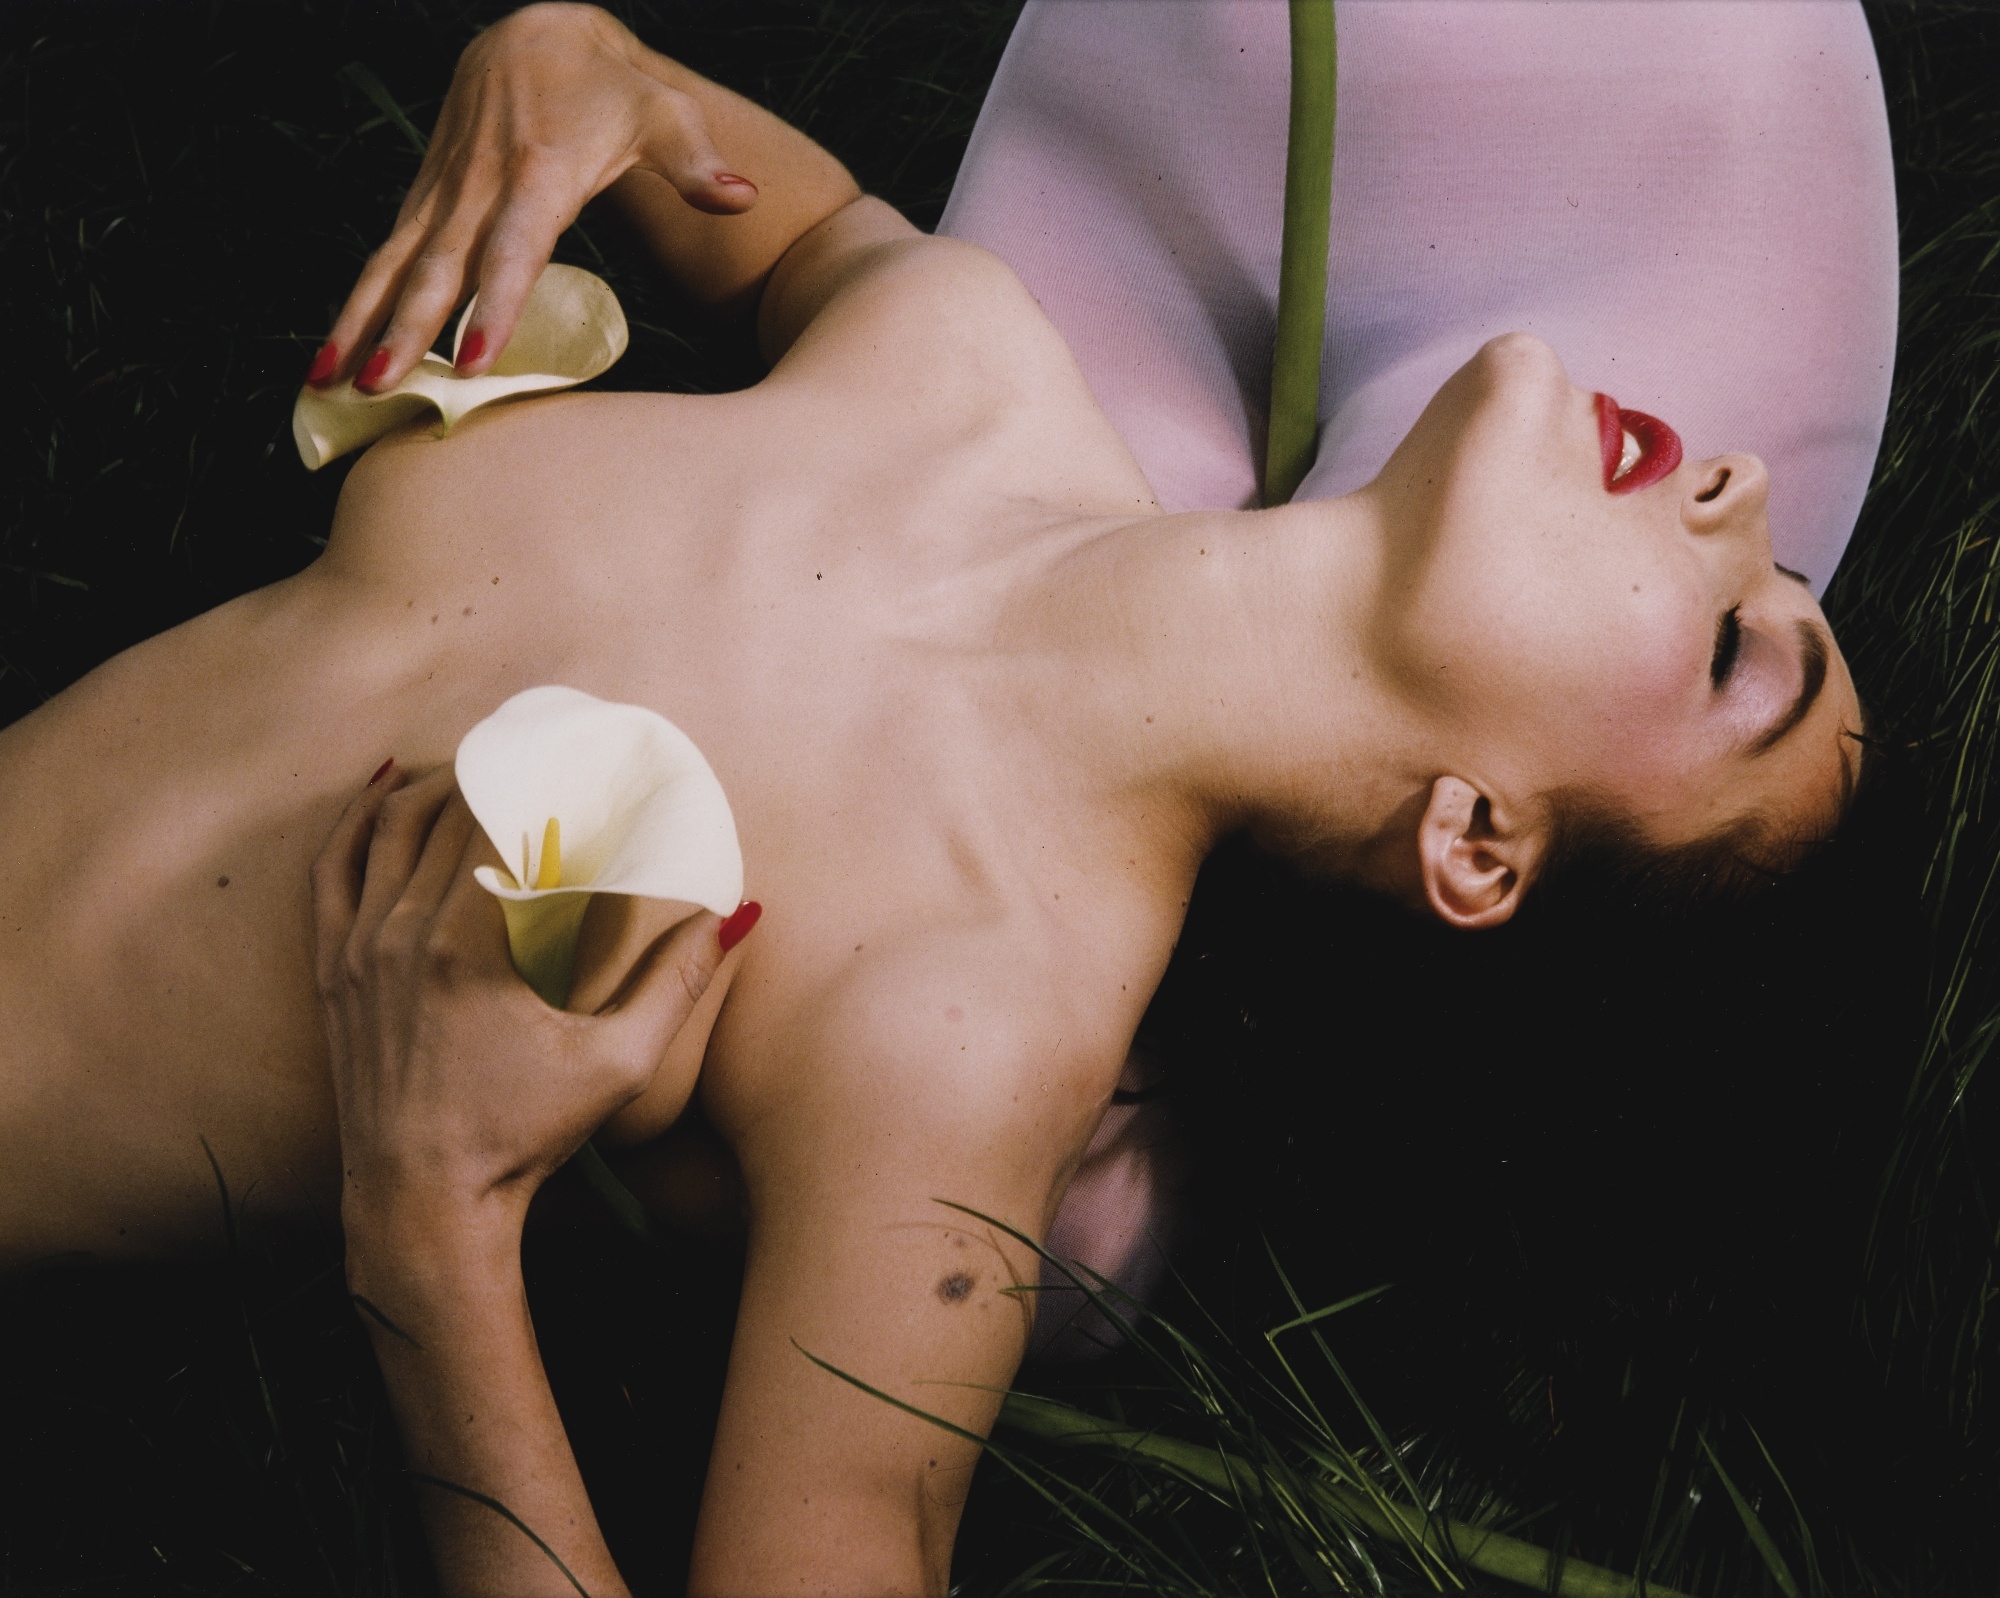 Sighs and Whispers, lingerie catalog photographed by Guy Bourdin, 1976.